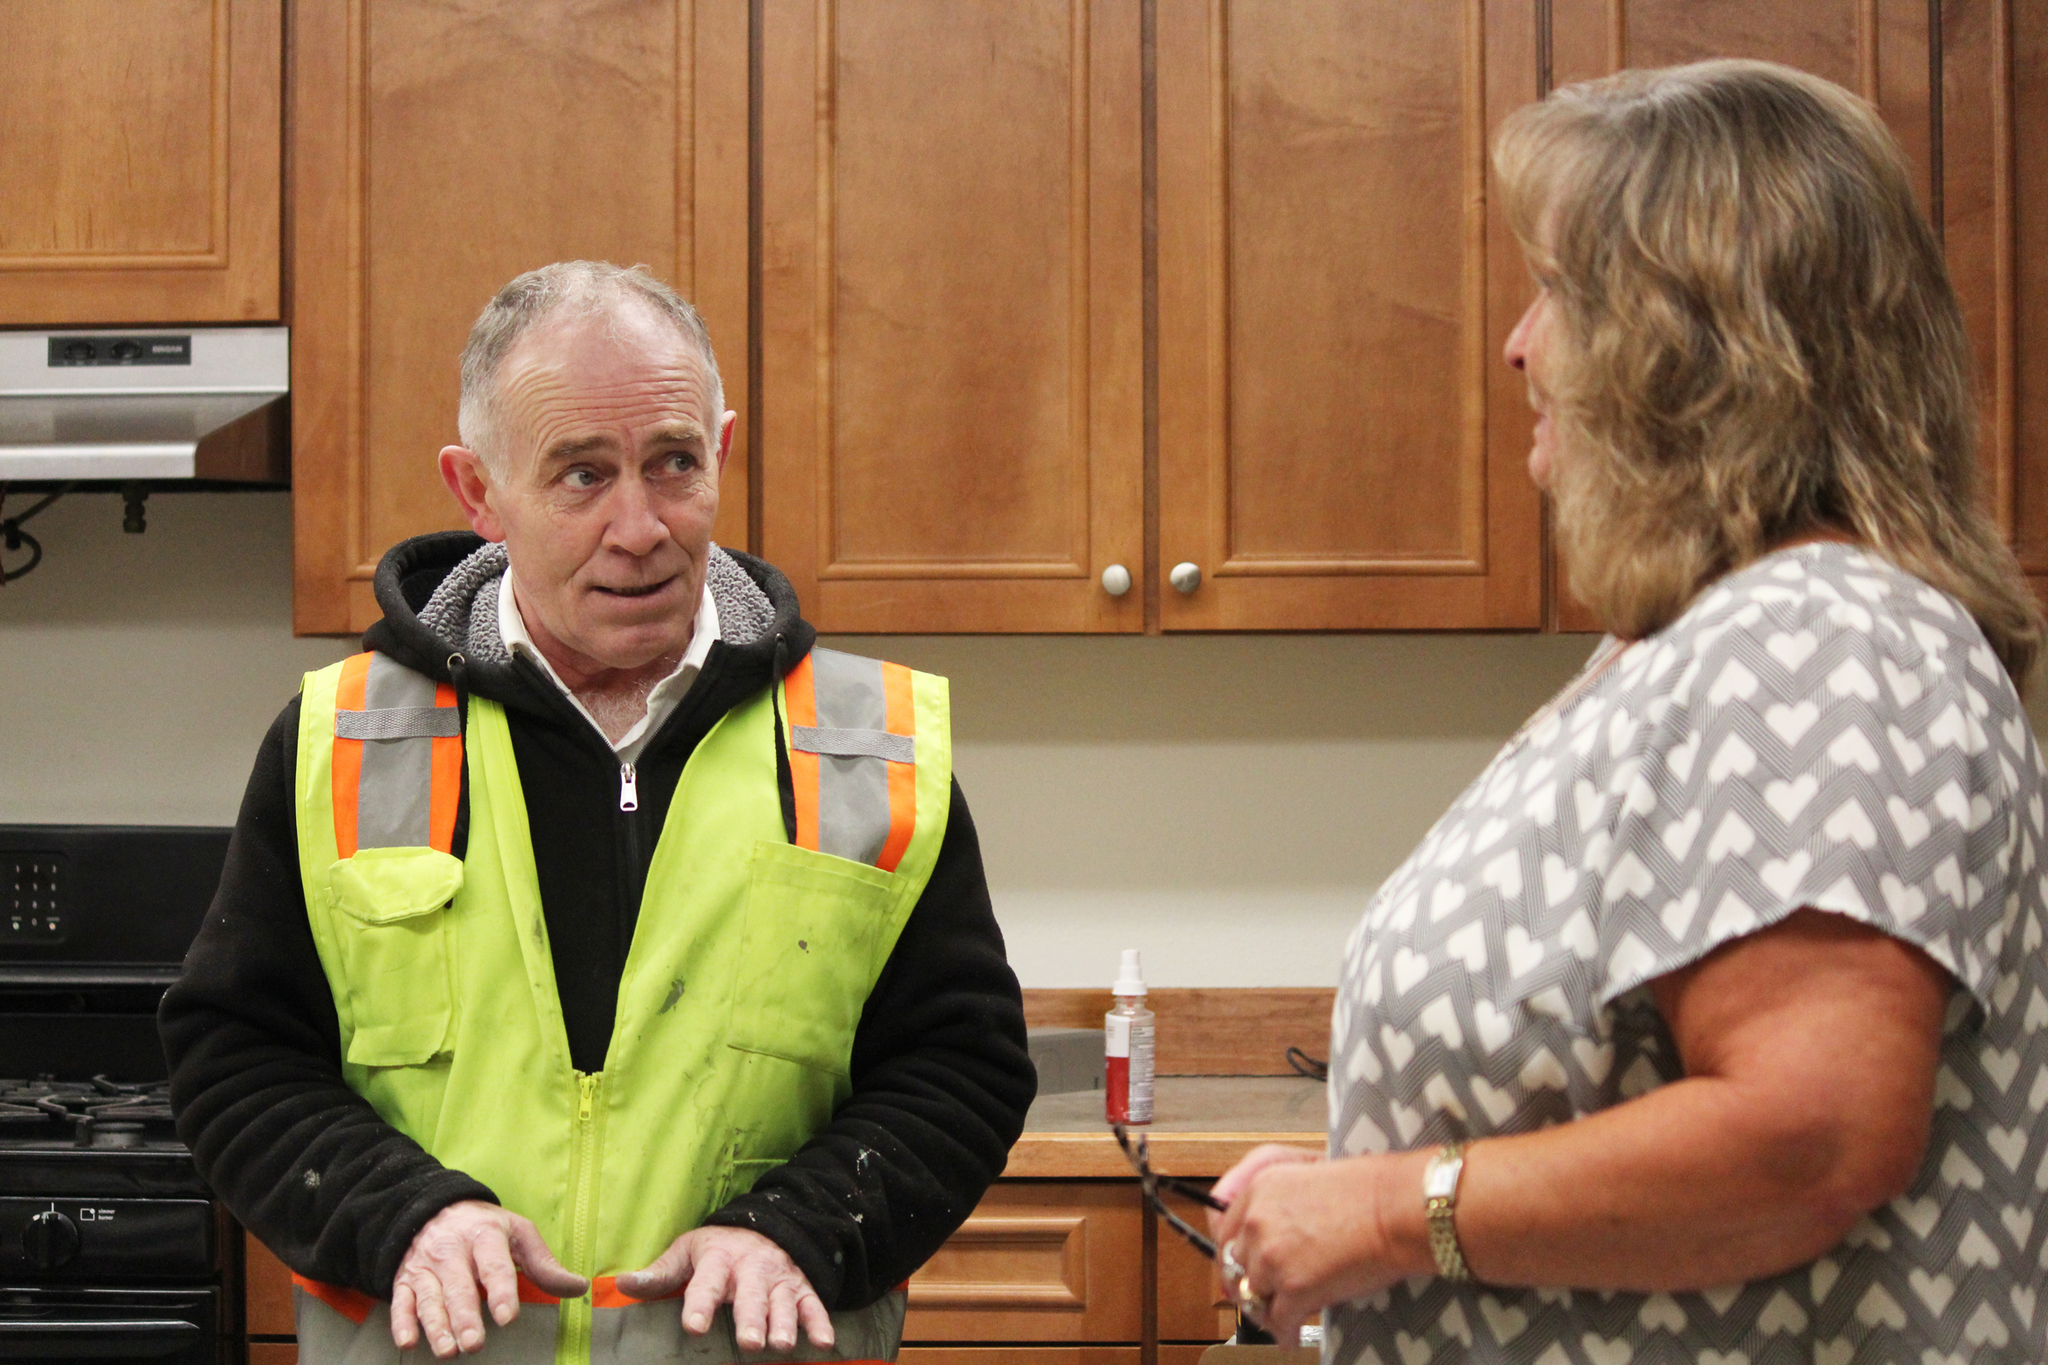 Jay Johnson, superintendent at Blazy Construction, talks with LeeShore Center Executive Director Cheri Smith about the renovation to the center’s kitchen Wednesday, Feb. 1, 2017 at the center in Kenai, Alaska. (Megan Pacer/Peninsula Clarion)